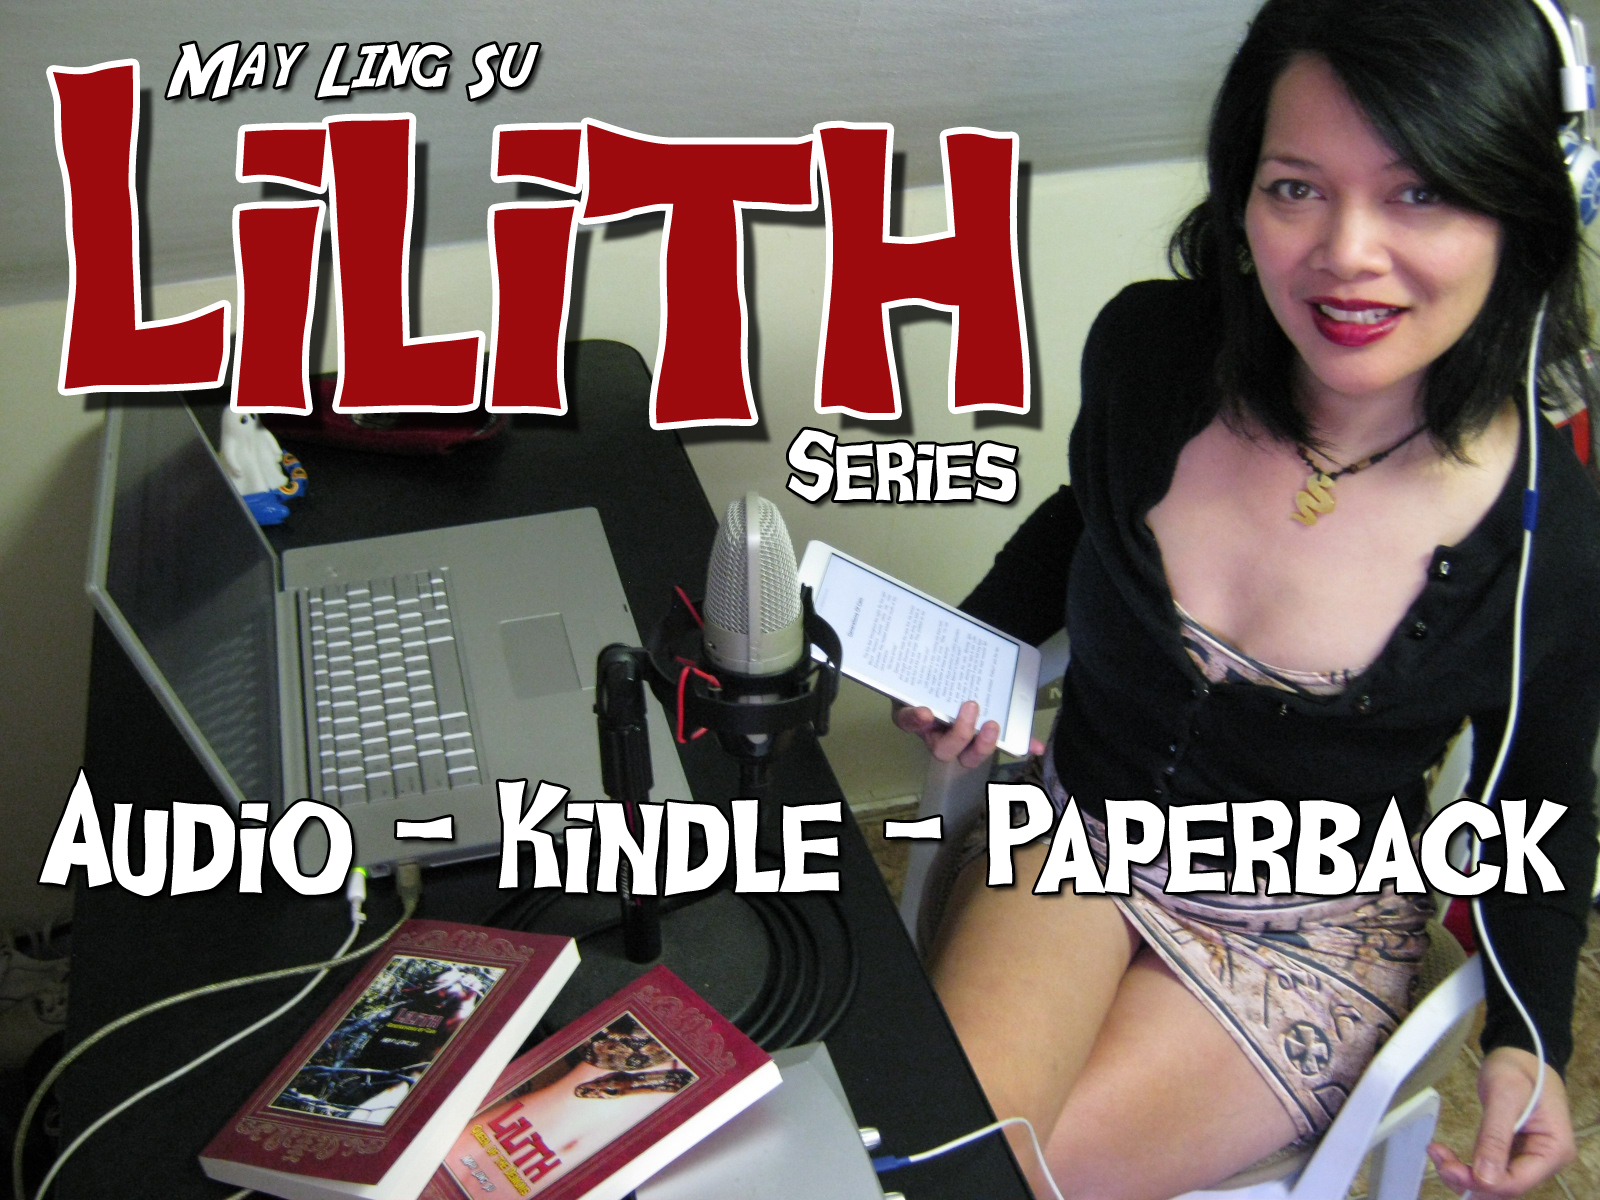 Lilith book series on audiobook, kindle, paperback by May Ling Su